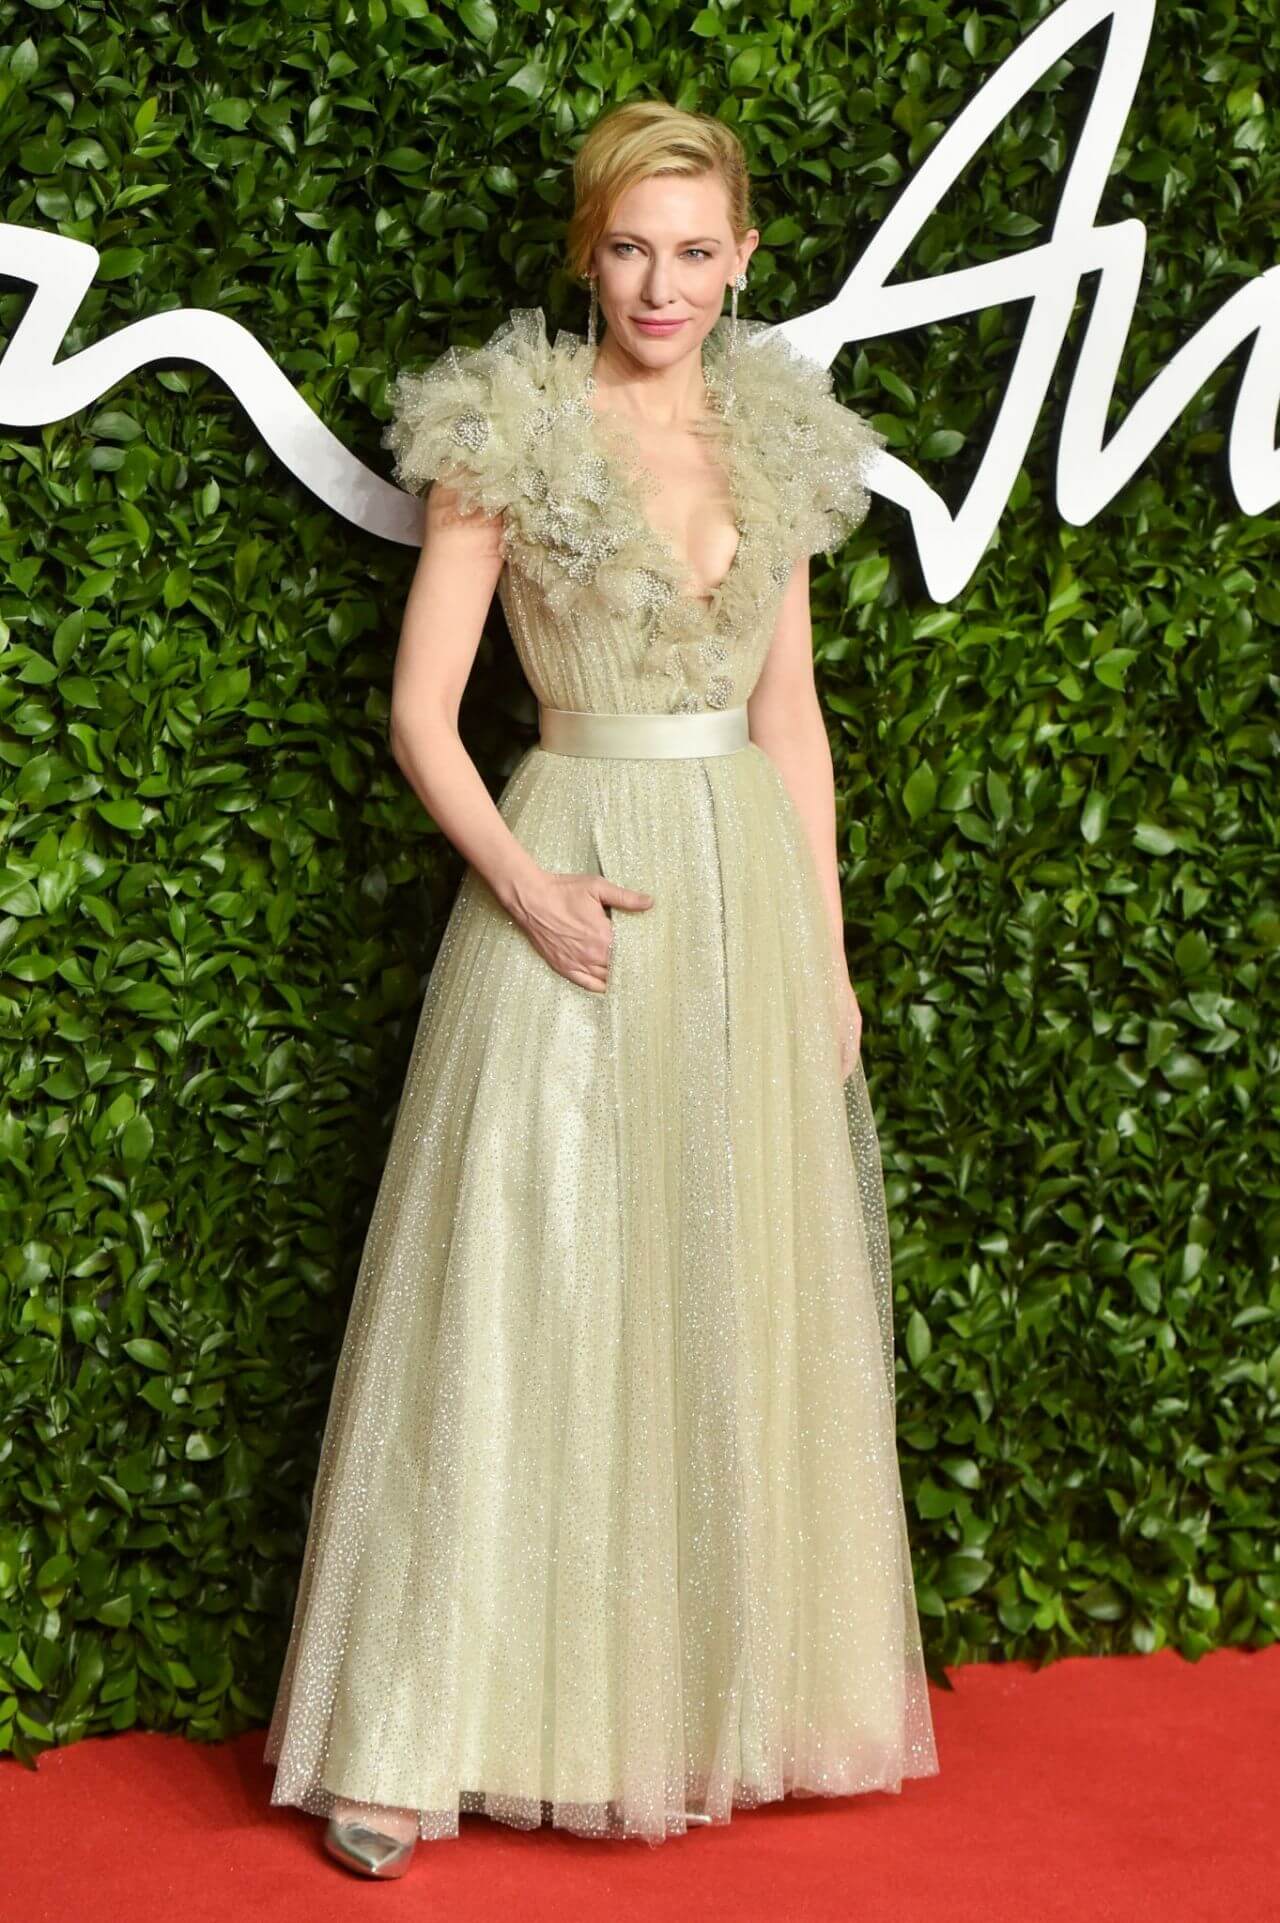 Cate Blanchett  In Olive Green Feather Style Long Gown At Fashion Awards  in London